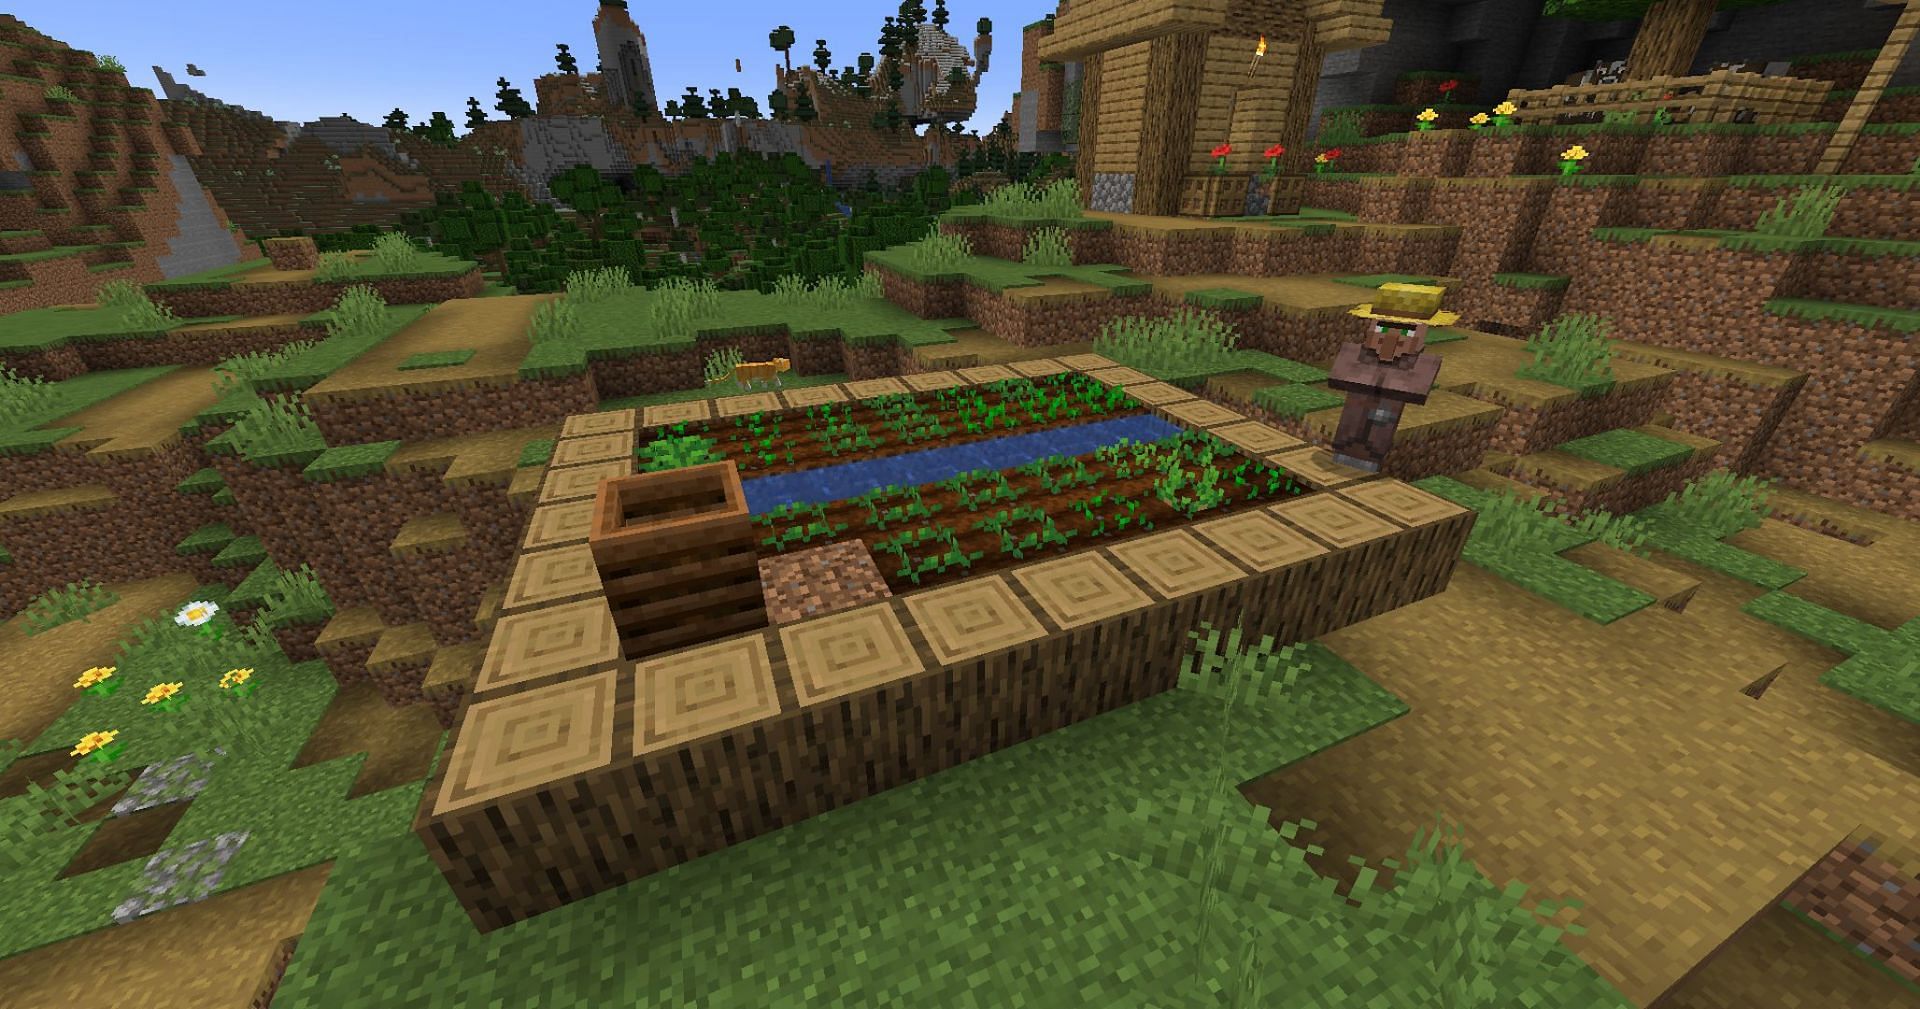 Interestingly, many systems consider nitwits as being employed like other villagers (Image via Mojang)